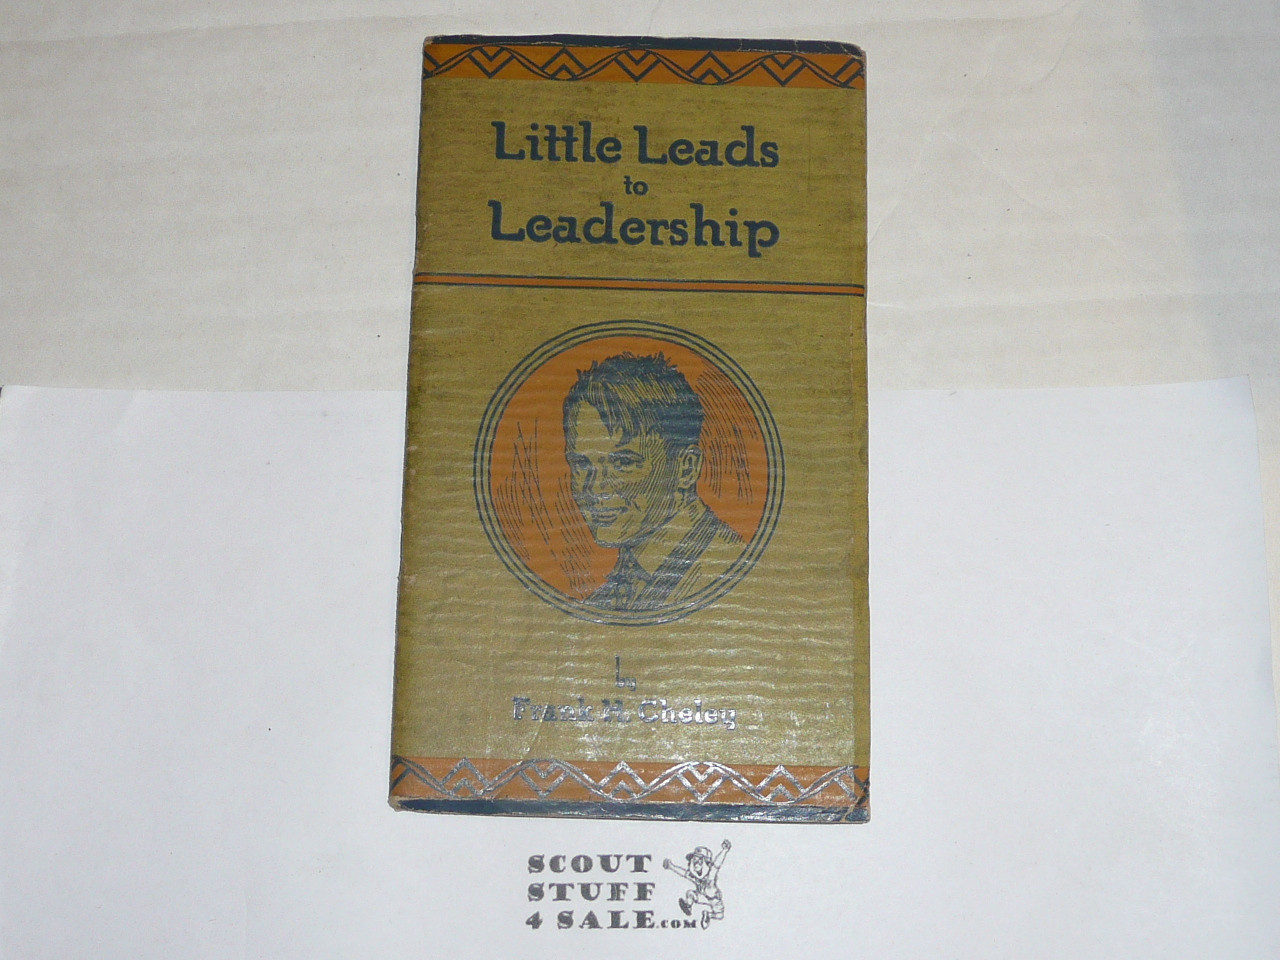 1928 Little Leads to Leadership, By Frank Cheley, Little Loose Leaf Series